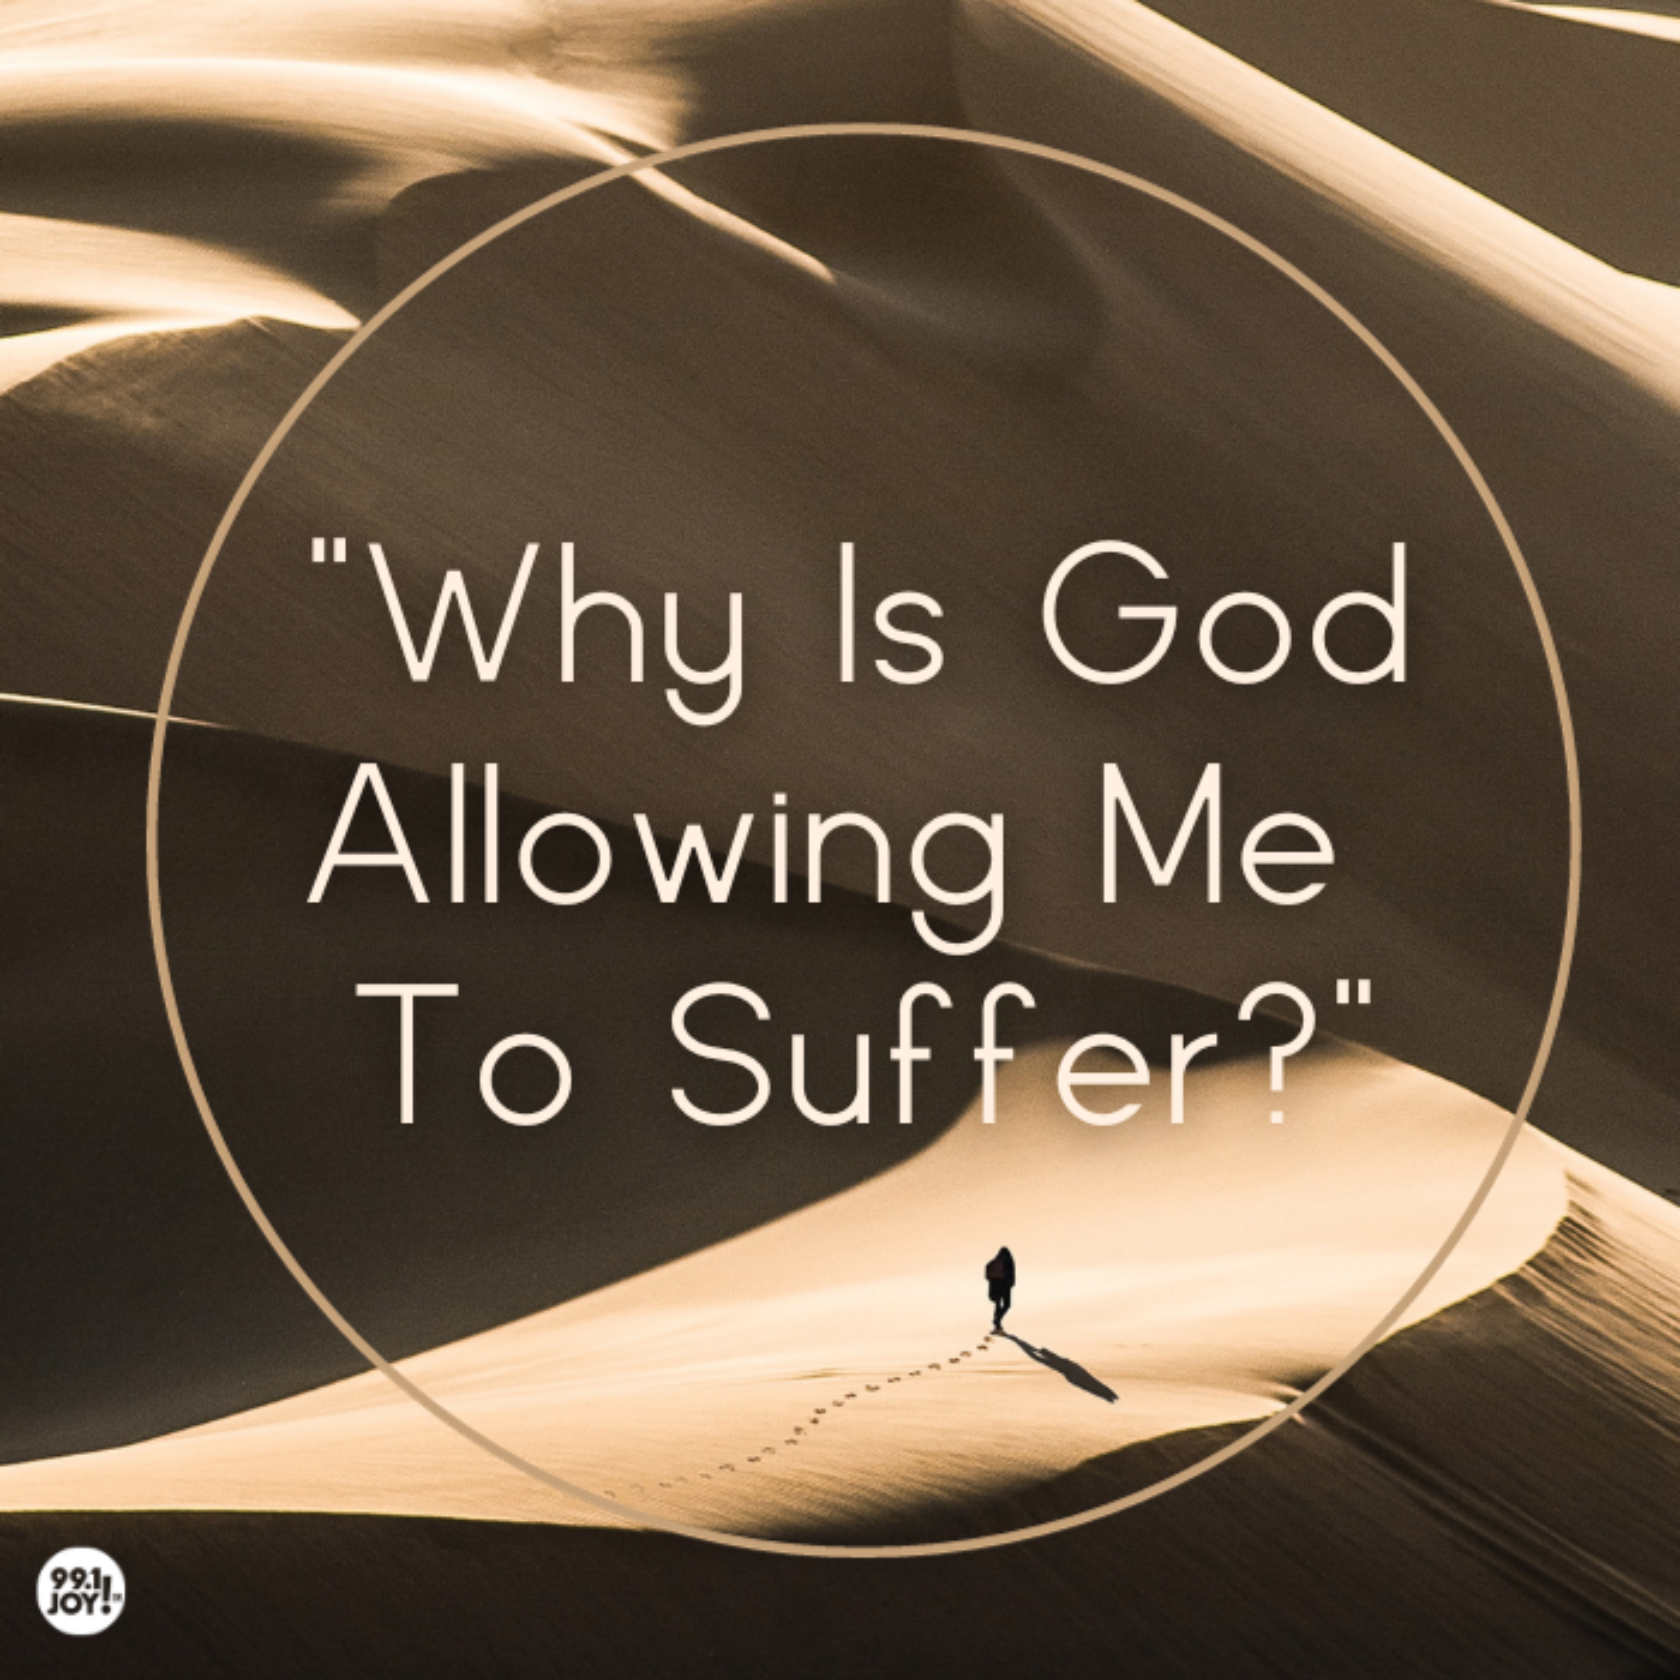 “Why Is God Allowing Me To Suffer?”